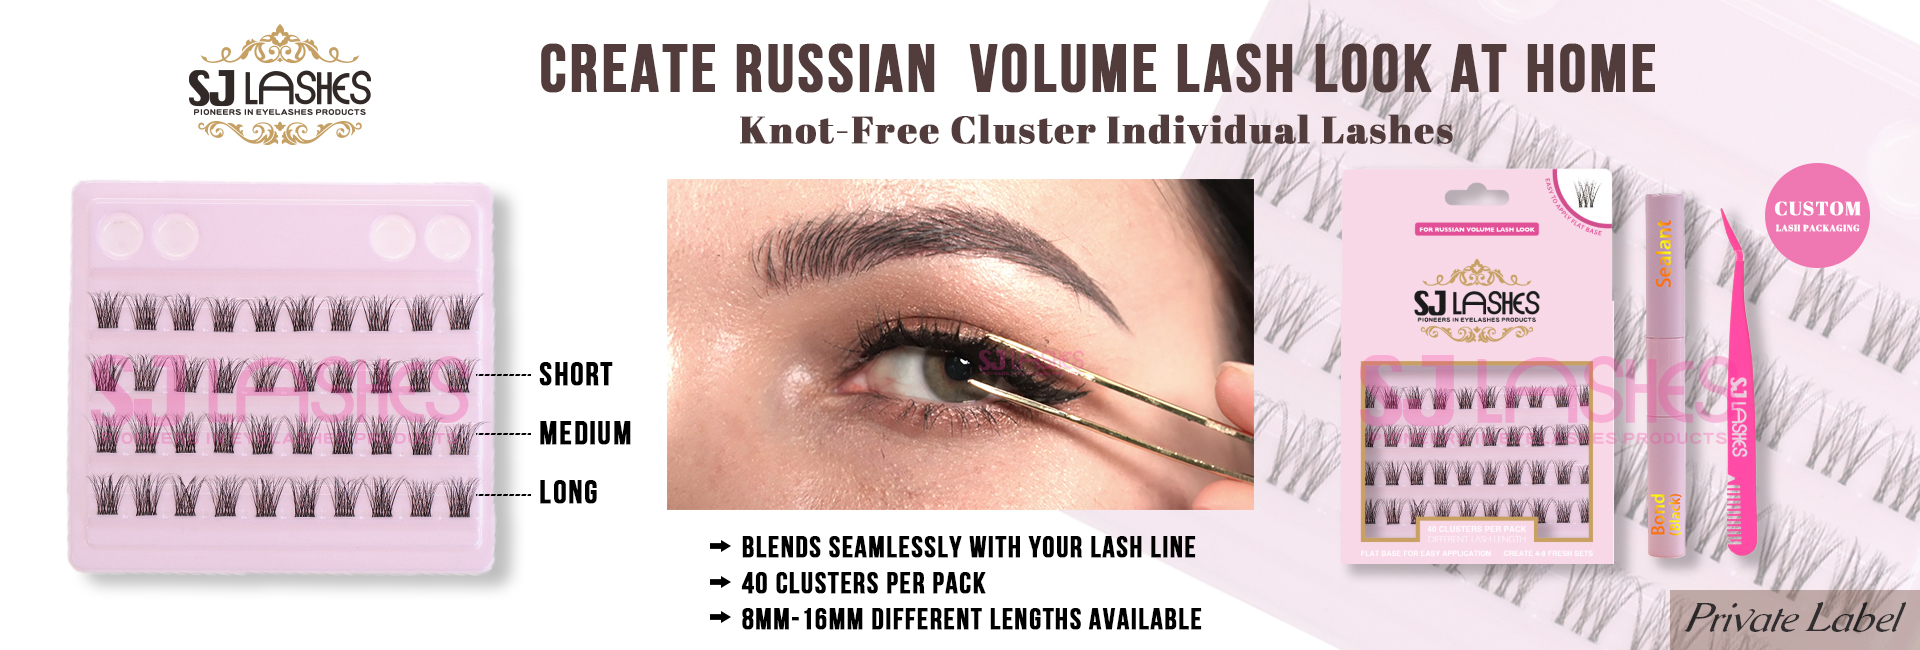 Knot-Free Cluster Individual Lashes